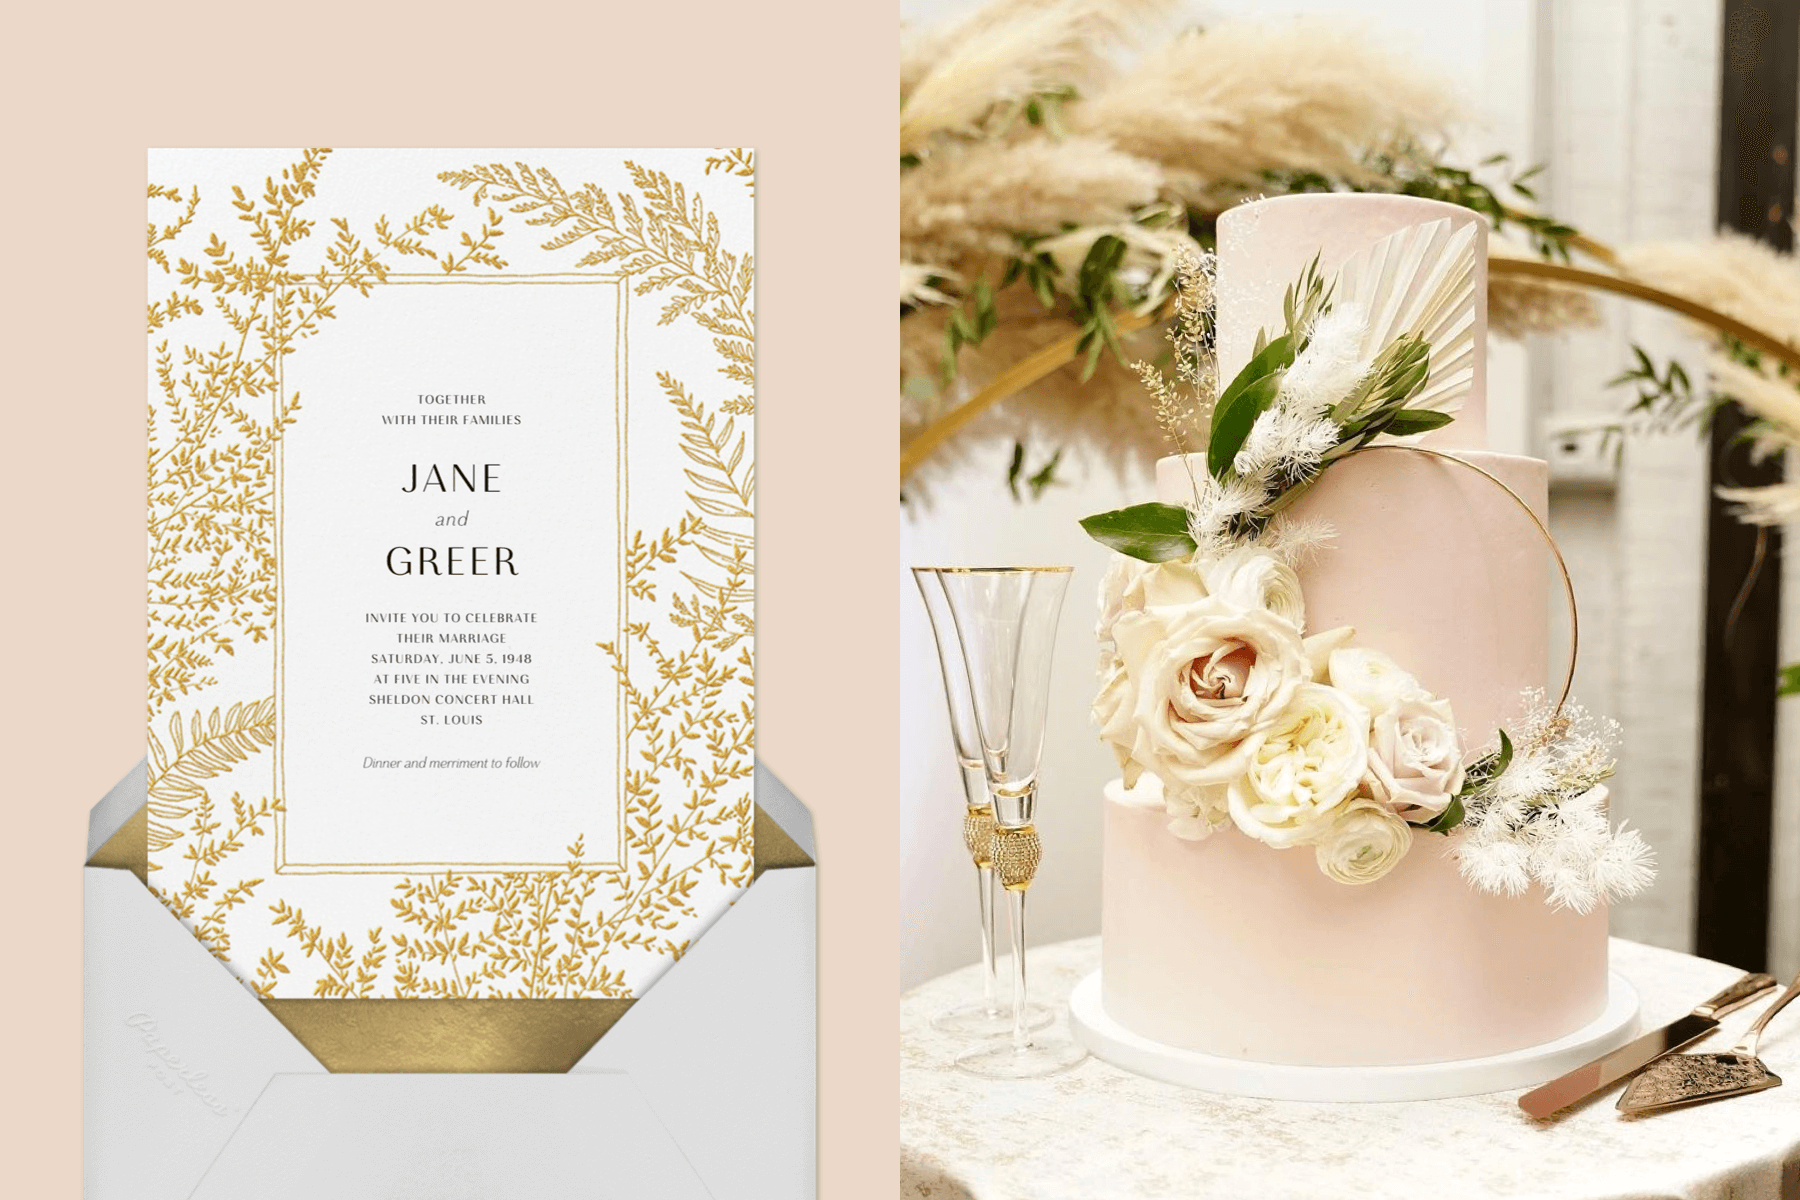 left: A wedding invitation with a border of gold ferns. Right: A pink three-tiered cake decorated with pale roses. 